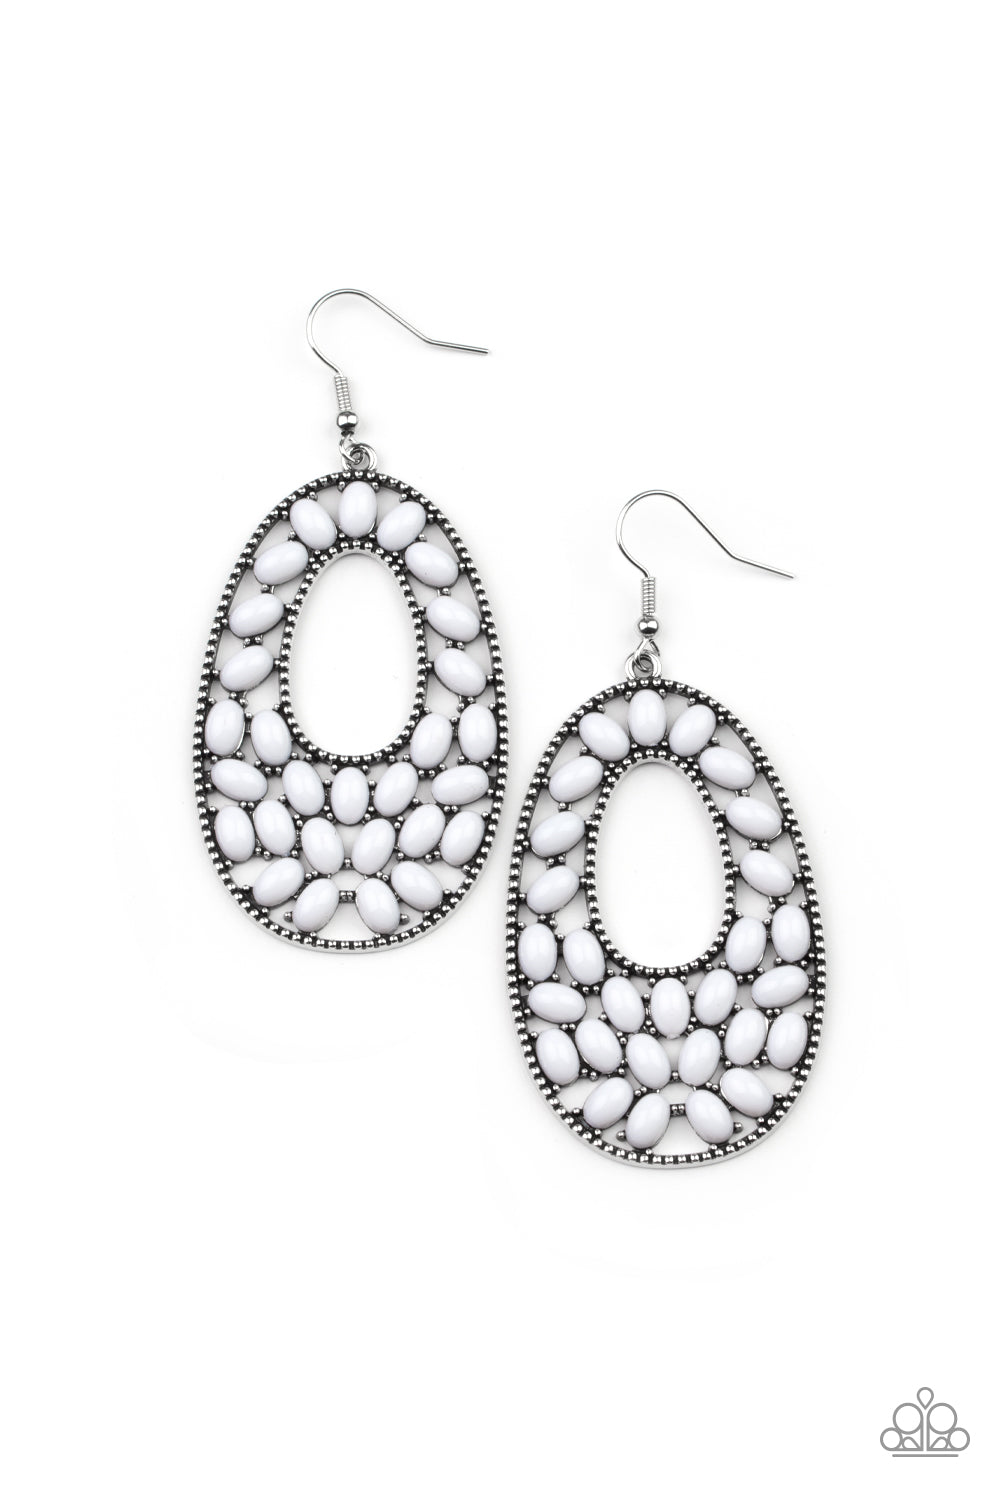 Beaded Shores White Earring - Paparazzi Accessories.  A collection of oval white beads collect inside a studded silver oval frame, creating a bright pop of color. Earring attaches to a standard fishhook fitting.  ﻿﻿﻿All Paparazzi Accessories are lead free and nickel free!  Sold as one pair of earrings.